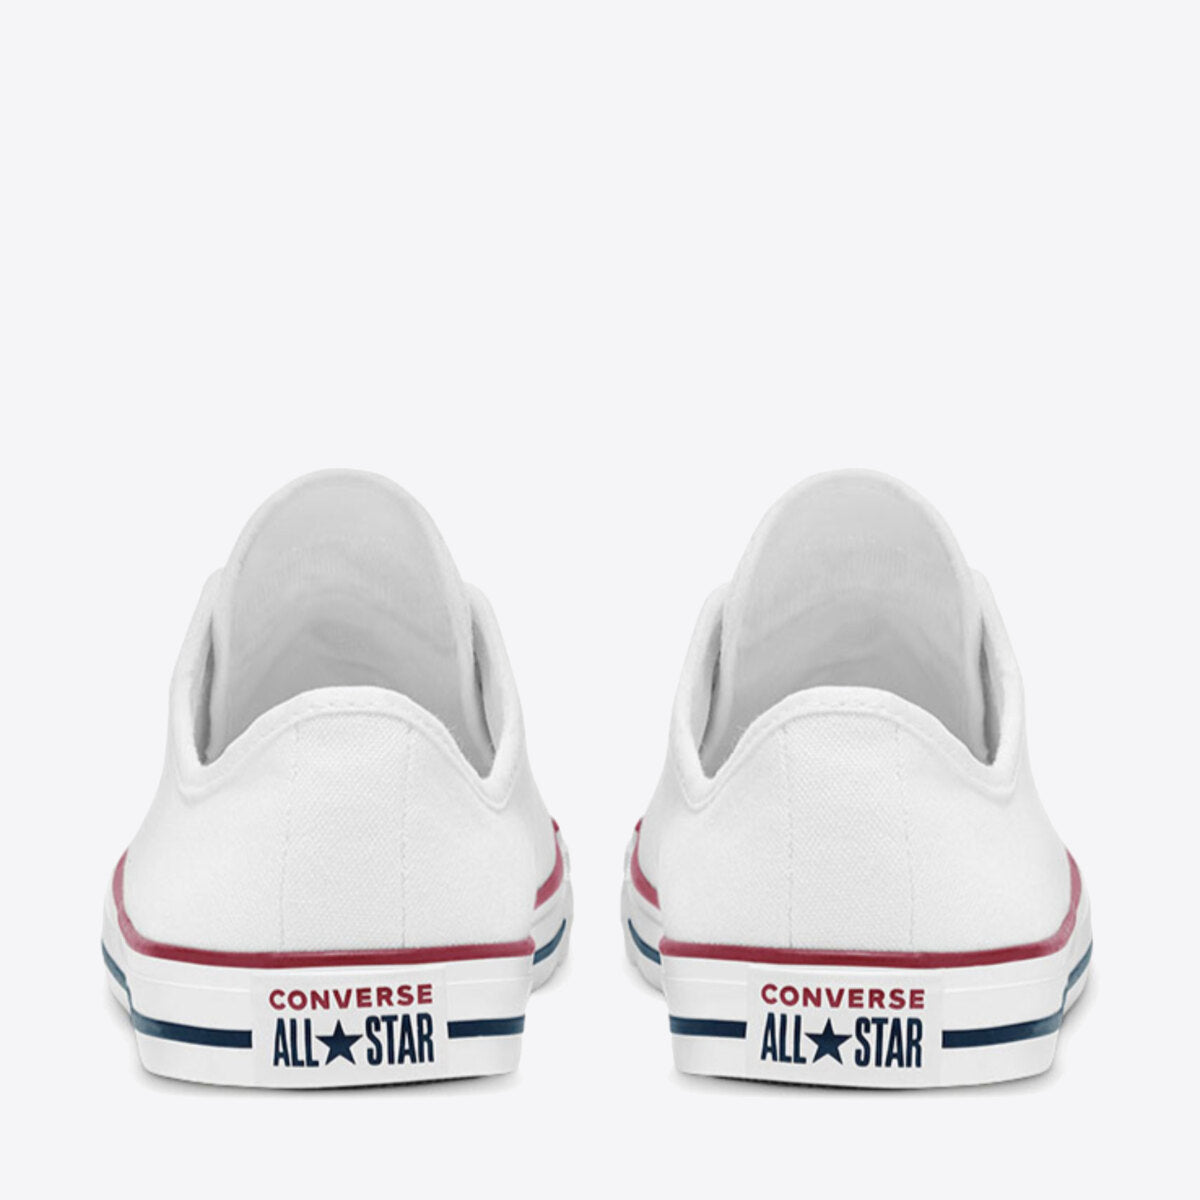 CONVERSE Dainty 2.0 Canvas Low White - Image 7